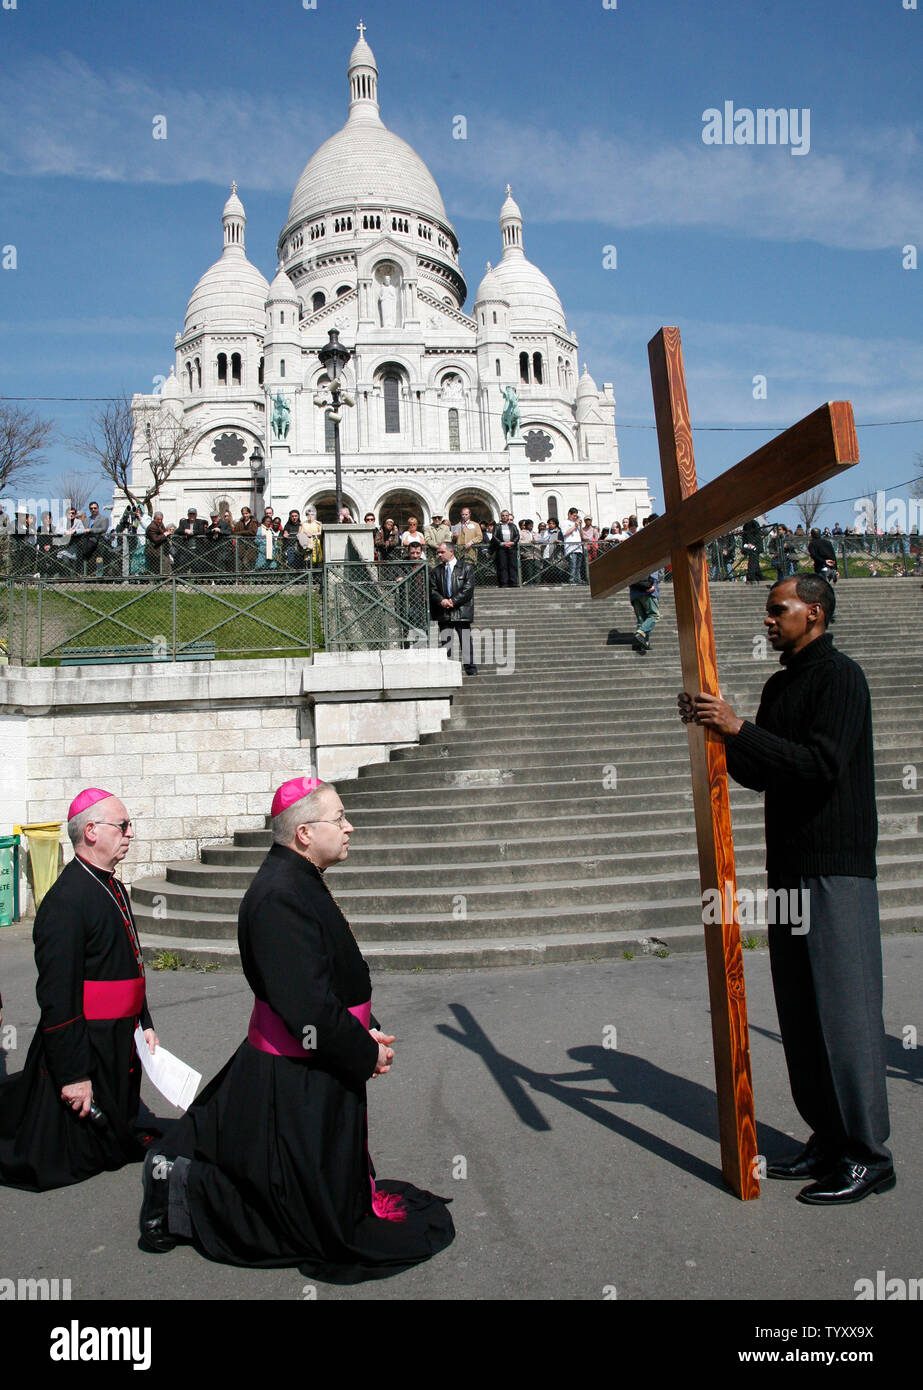 Archbishop of Paris Monseigneur Andr Vingt-Trois (R) genuflects at the steps of the Sacre Coeur Basilica during the 'Stations of the Cross' Good Friday ritual in the Montmartre area of Paris on April 6, 2007.  The ritual symbolically represents the final hours of the life of Jesus Christ.   (UPI Photo/ David Silpa) Stock Photo